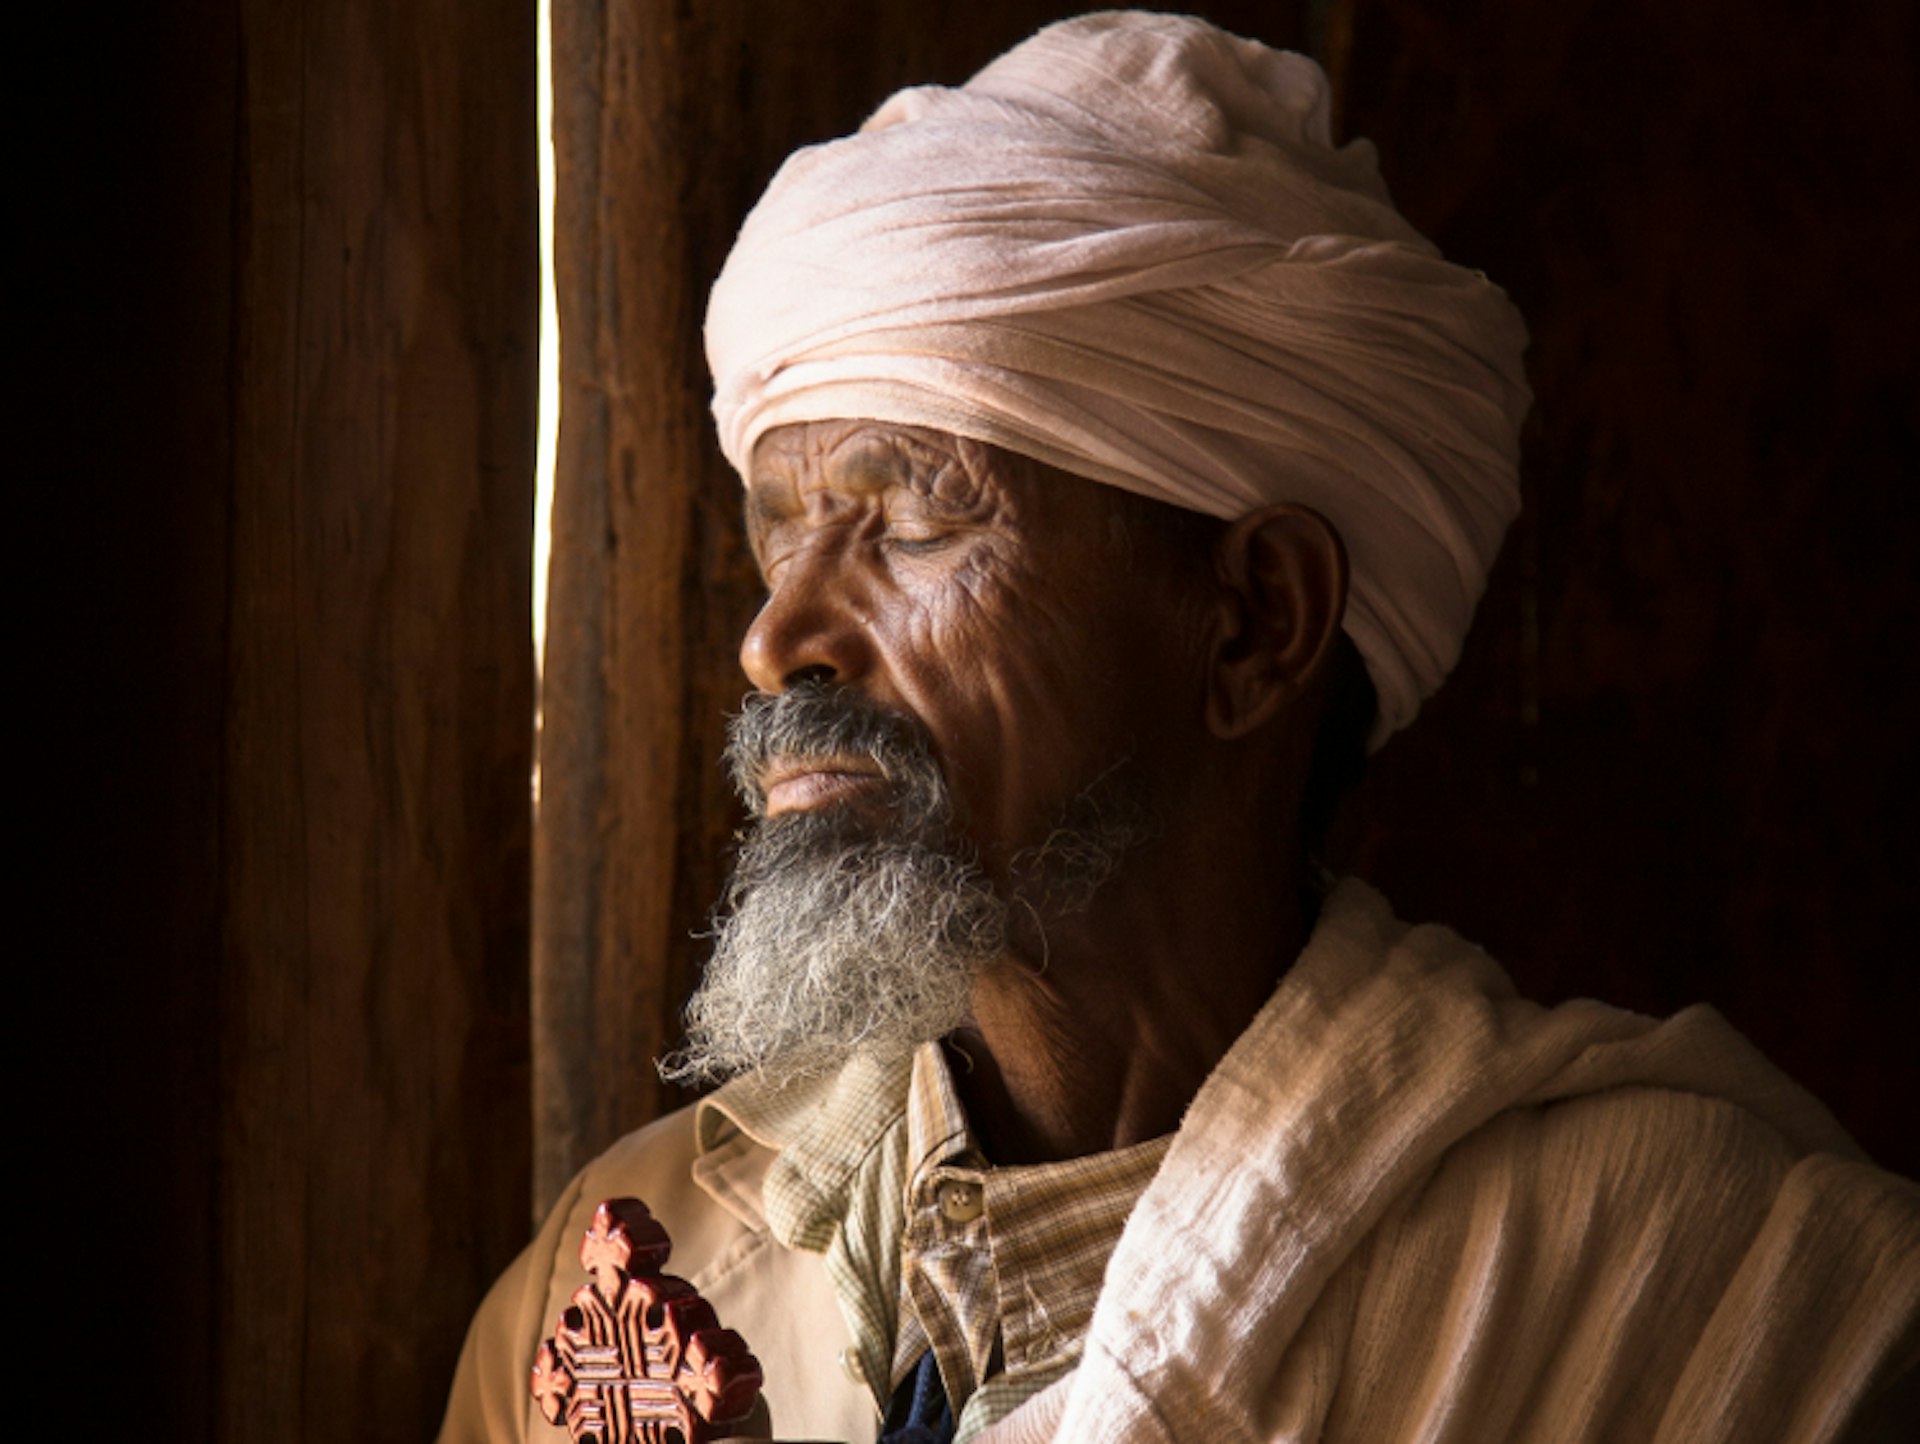 Keshi Teklai Abreha, the priest at the church of Abreha we Atsbeha. Image by Philip Lee Harvey / Lonely Planet